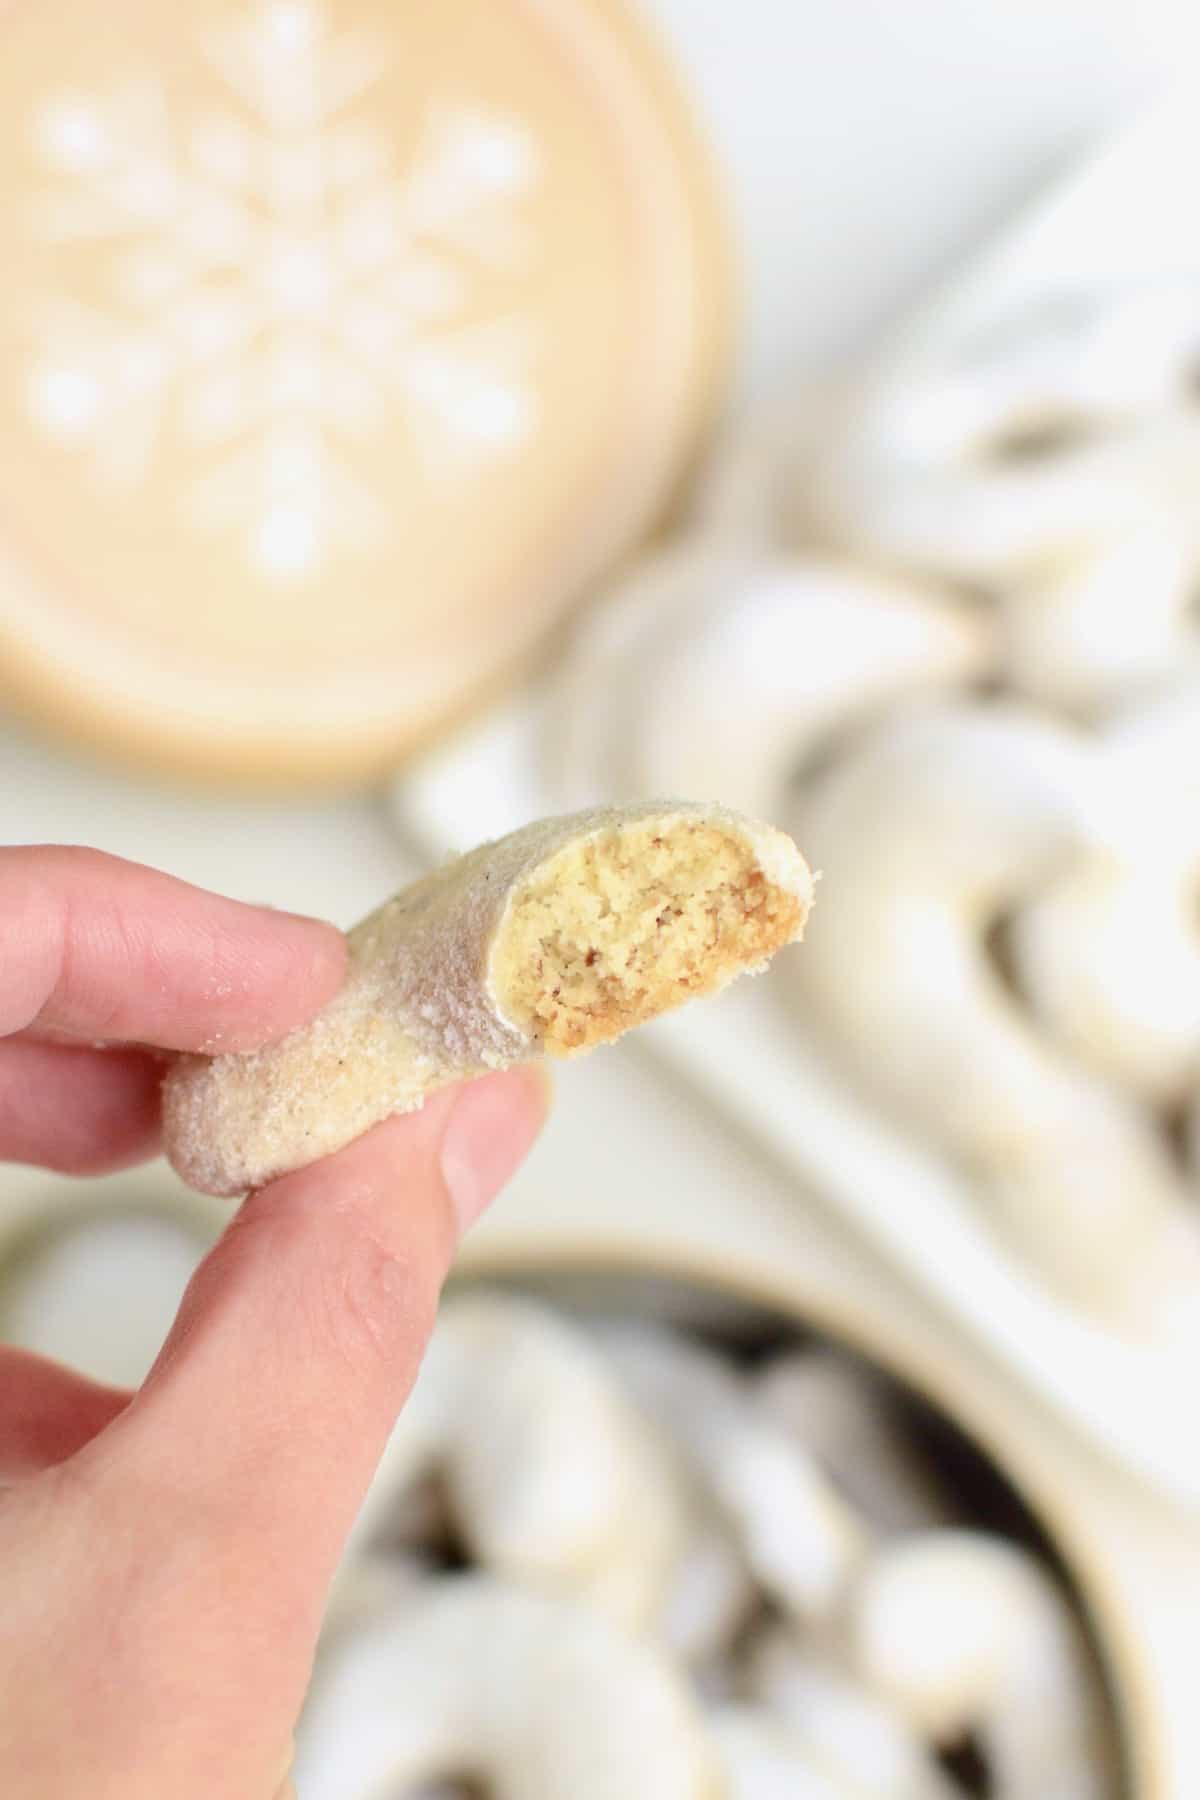 A half vanilla crescent cookie is held up towards the camera to reveal its crumbly and light inner texture.